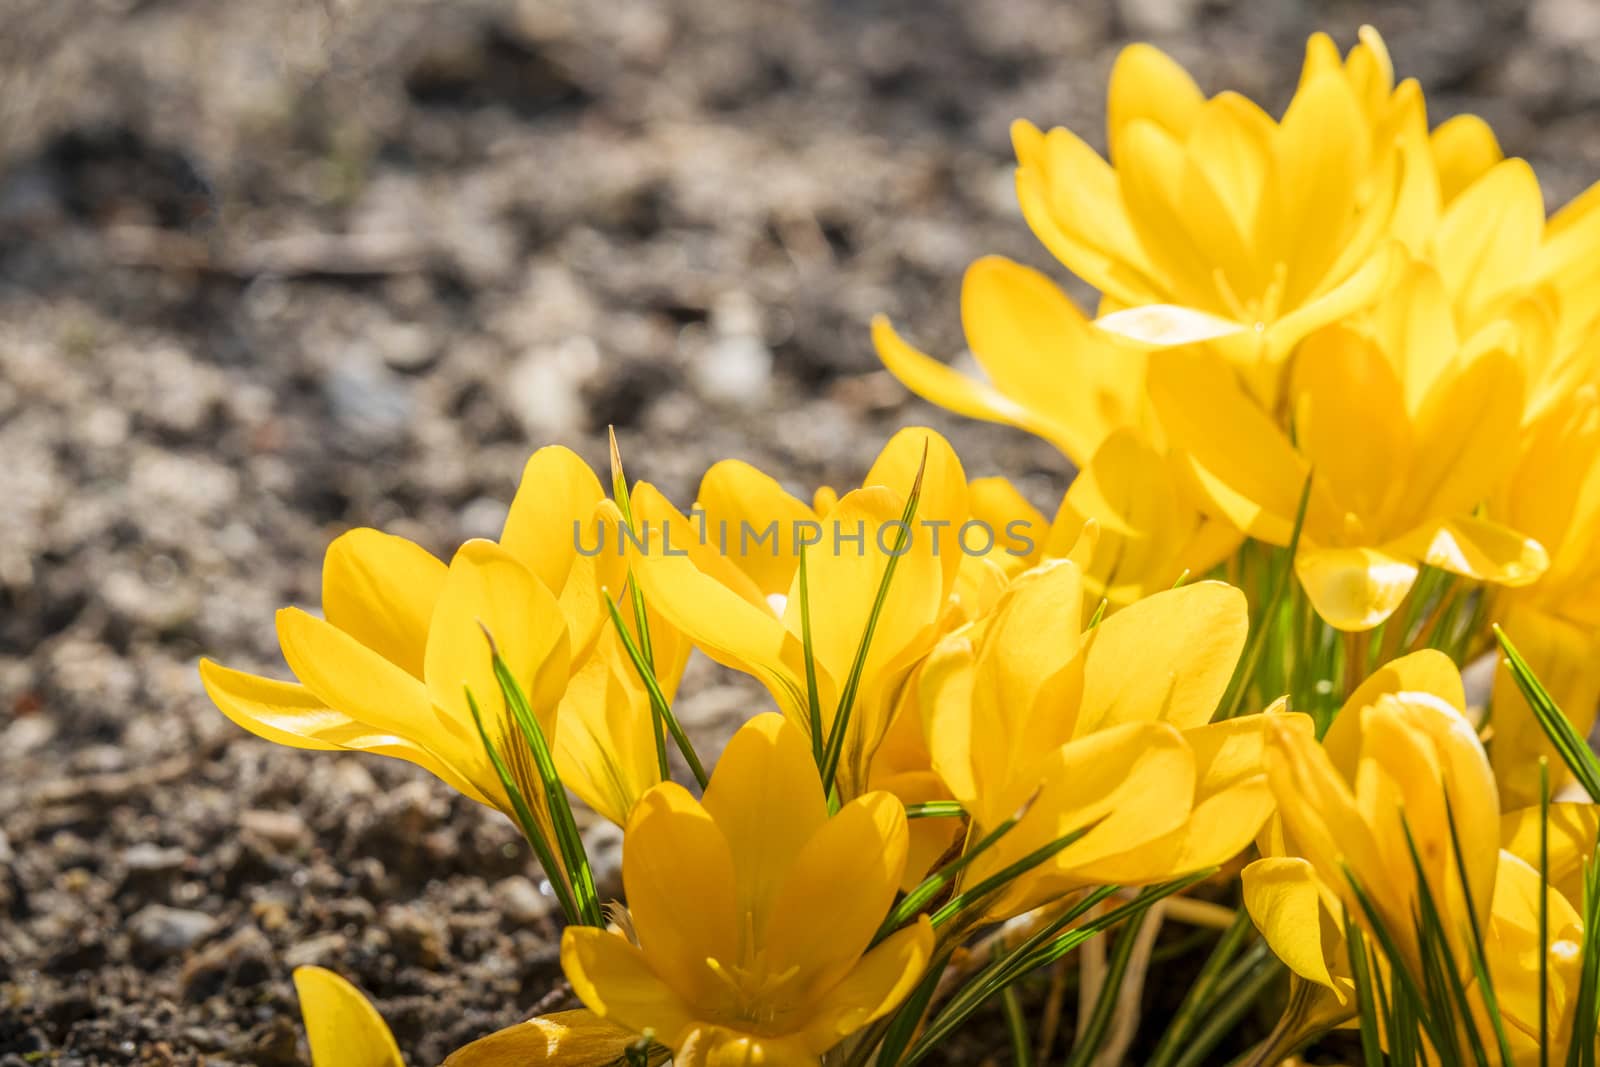 Yellow crocus flowers in a flowerbed at springtime blooming in the sun